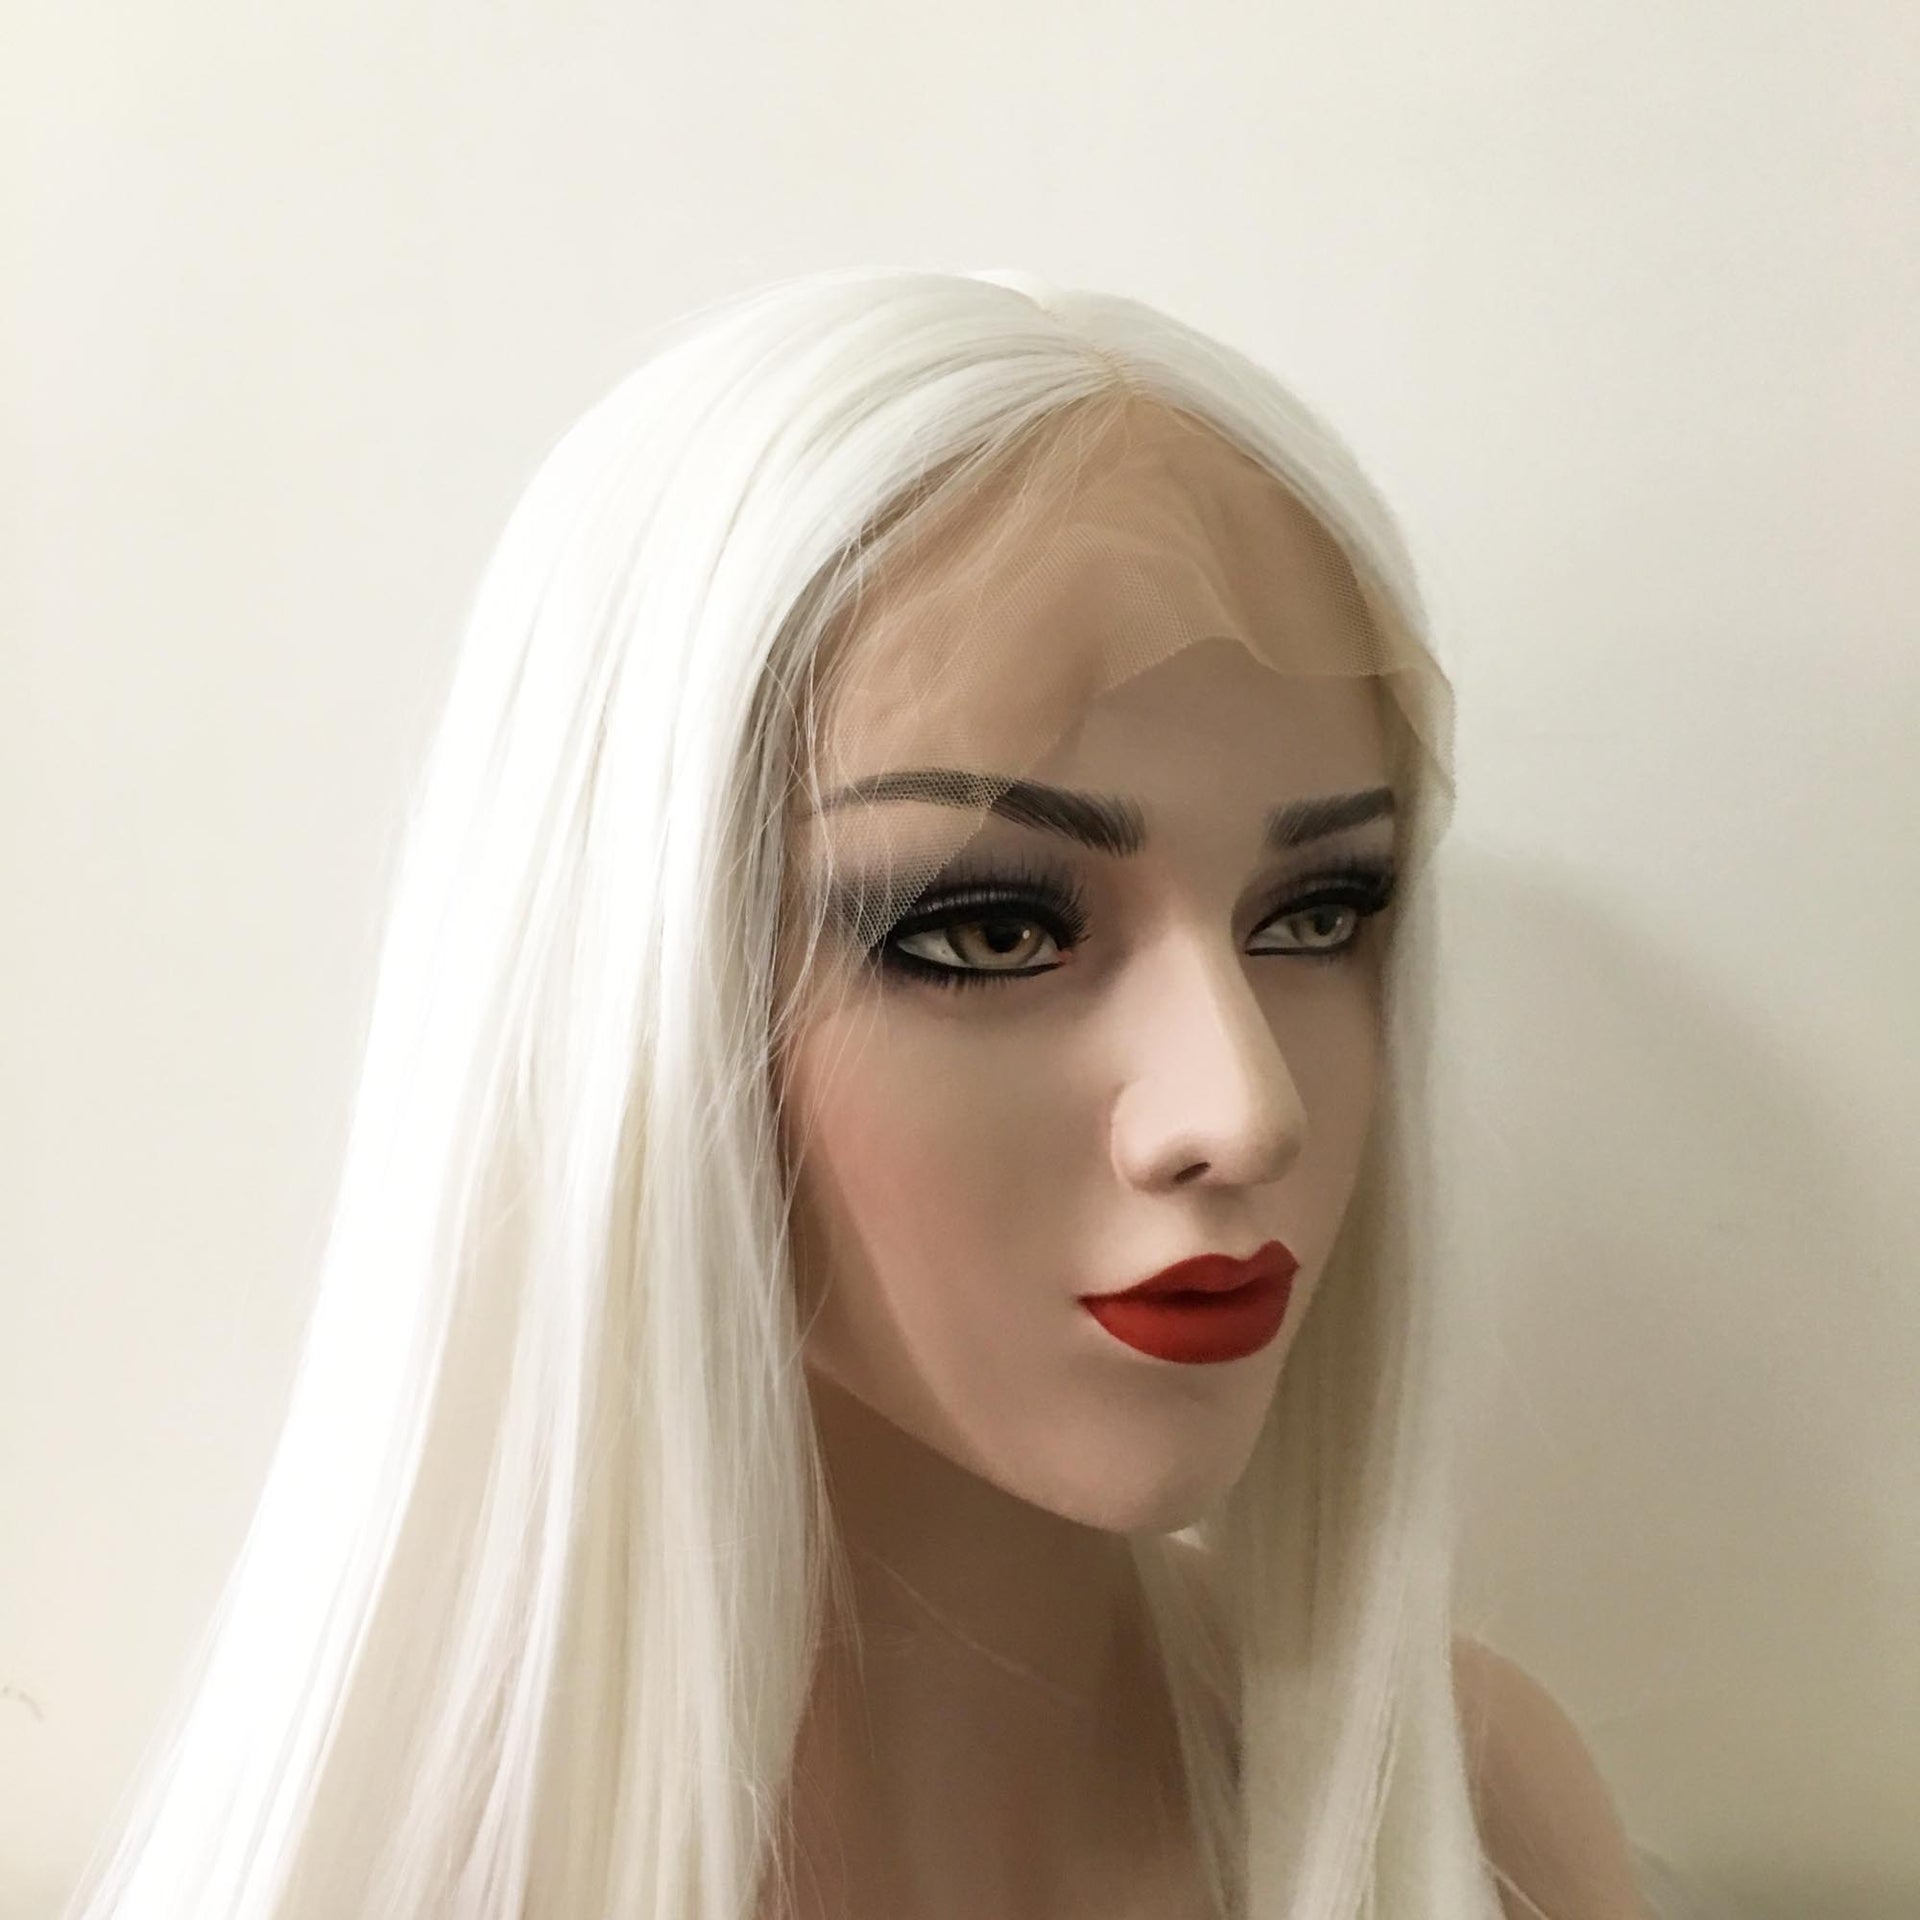 nevermindyrhead Women Snow White Lace Front Long Straight Middle Part Wig